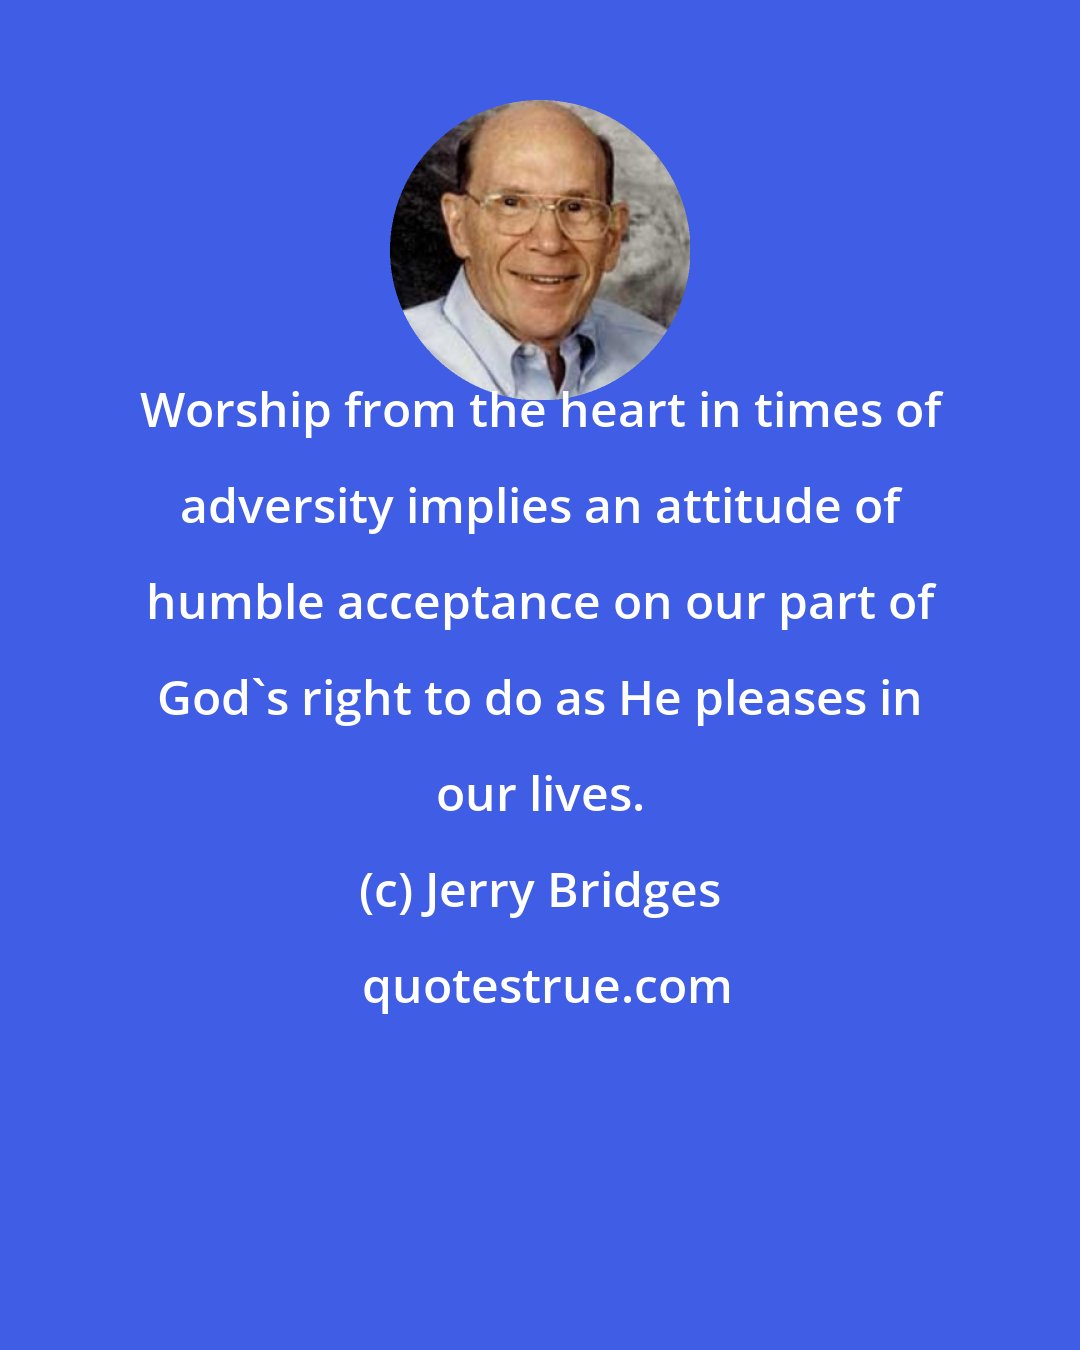 Jerry Bridges: Worship from the heart in times of adversity implies an attitude of humble acceptance on our part of God's right to do as He pleases in our lives.